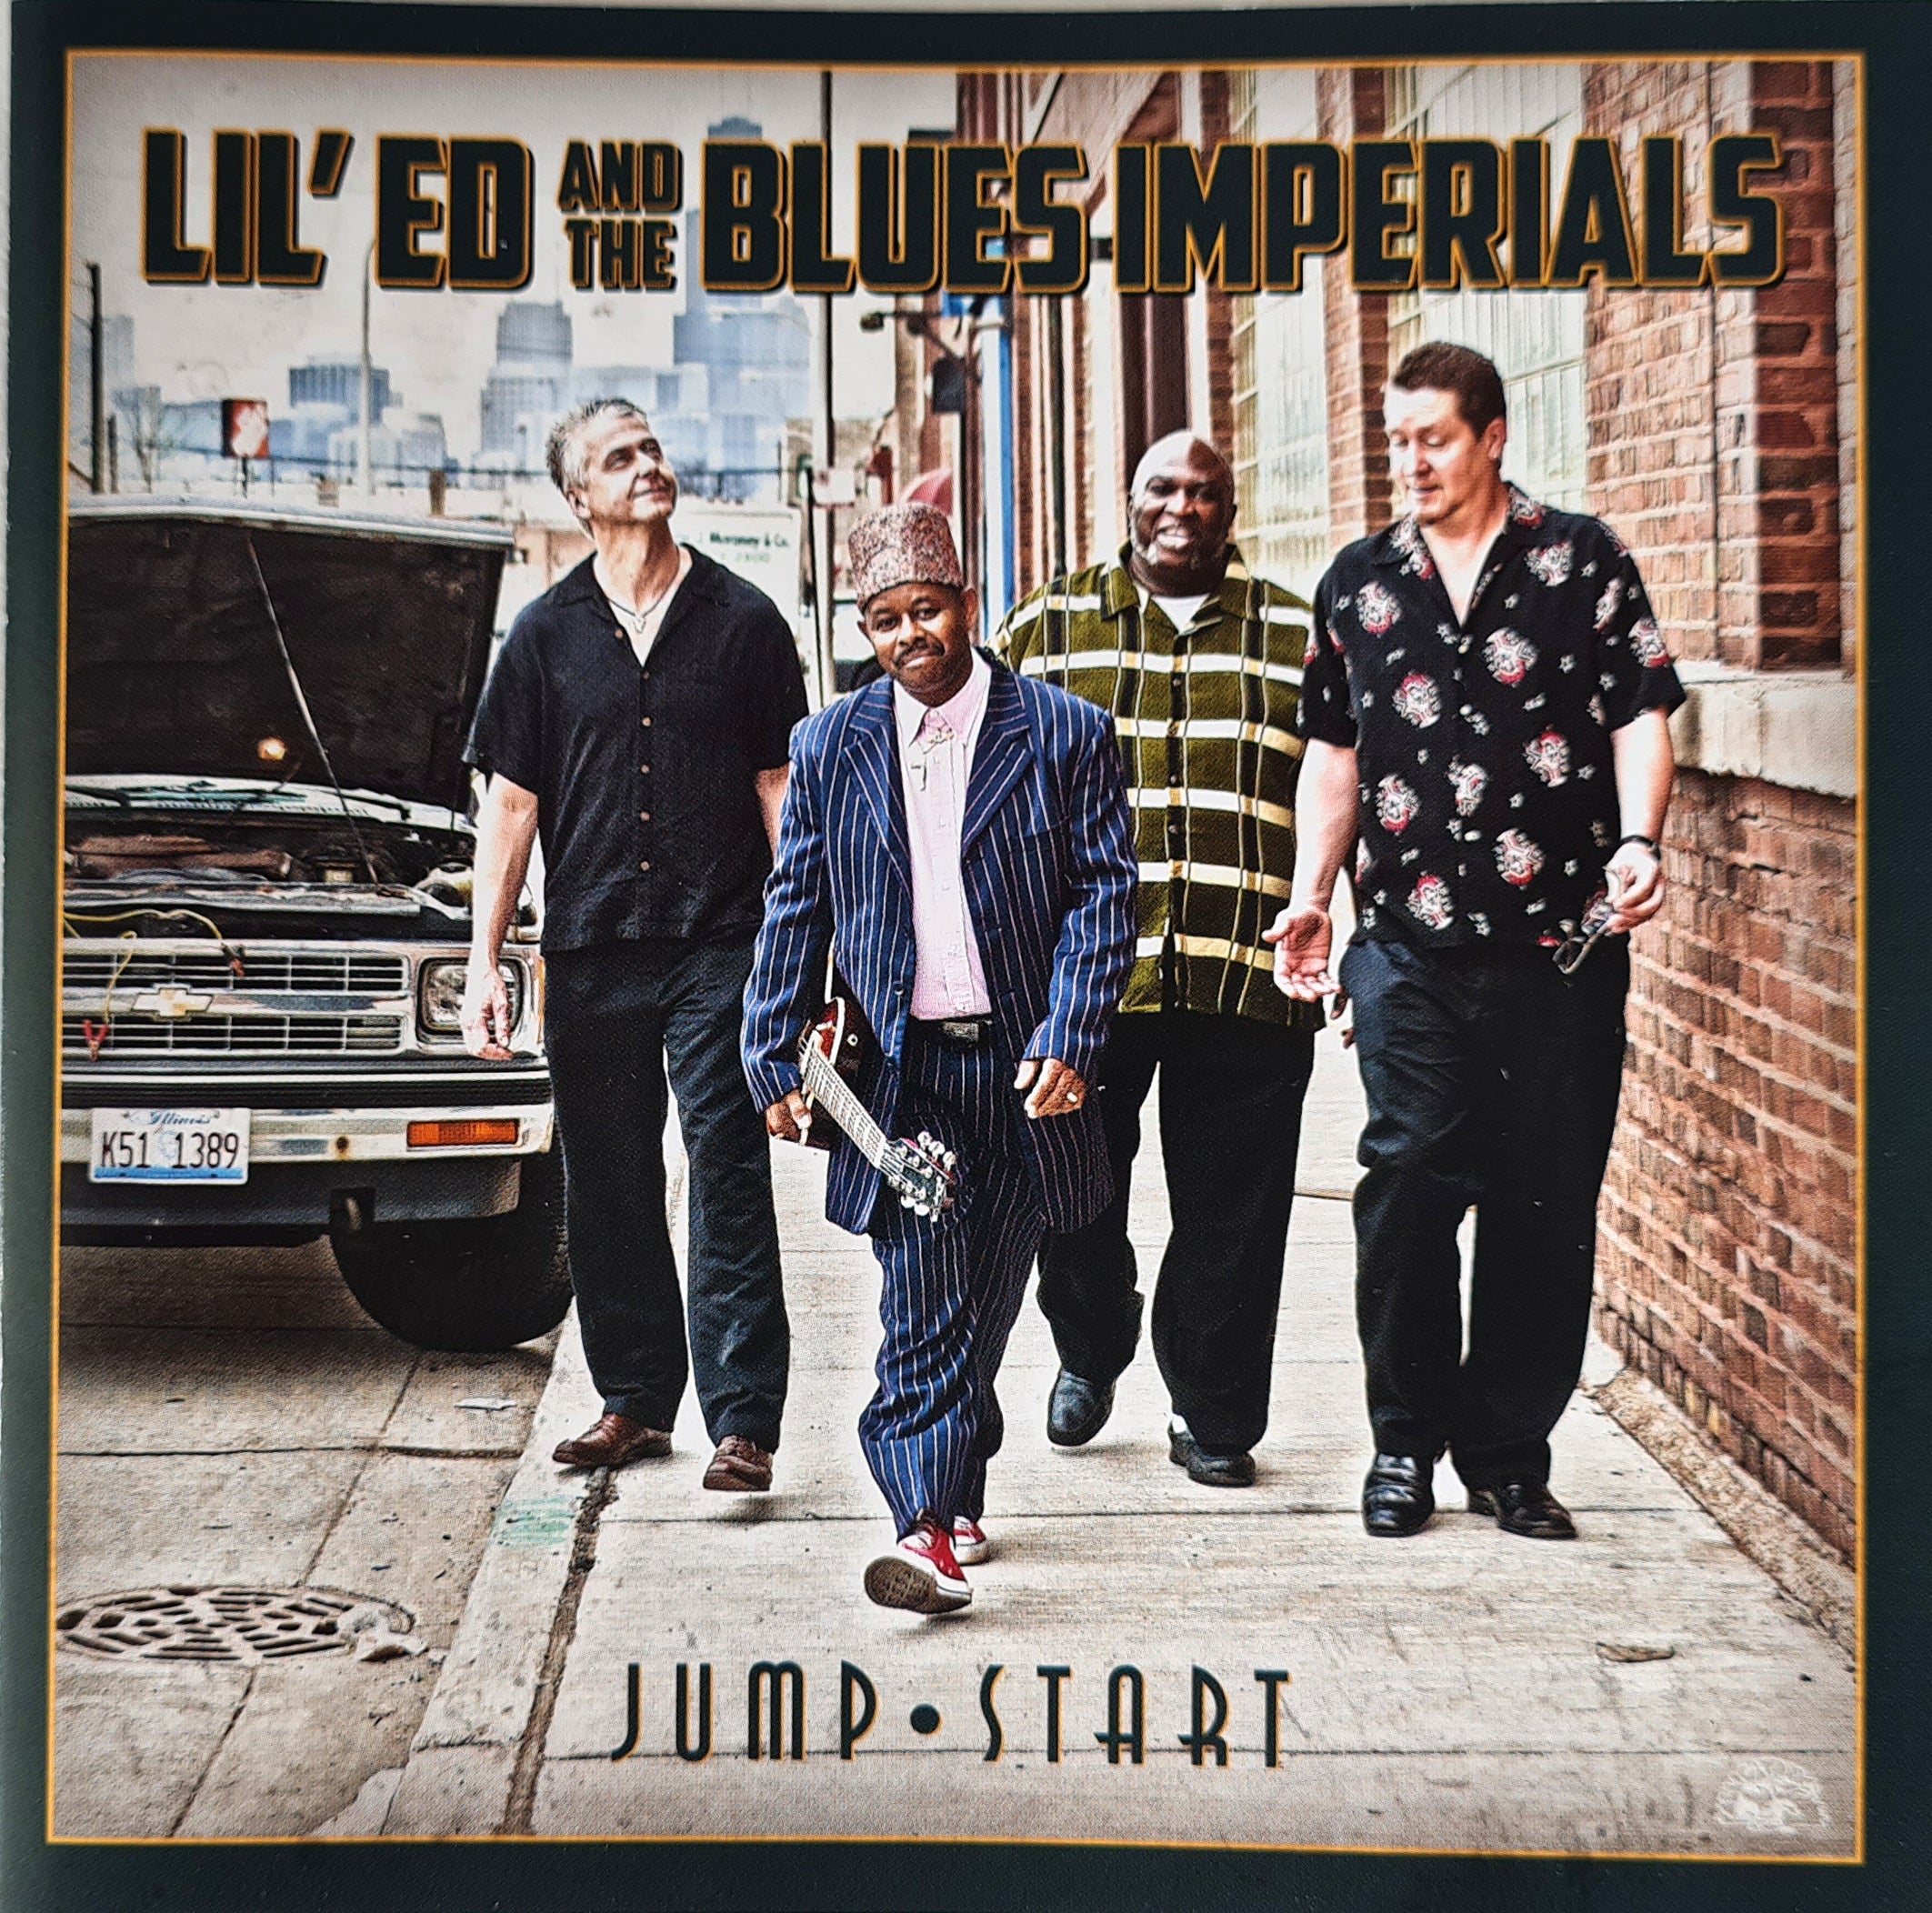 Lil' Ed and the Blues Imperials - Jump Start (CD)